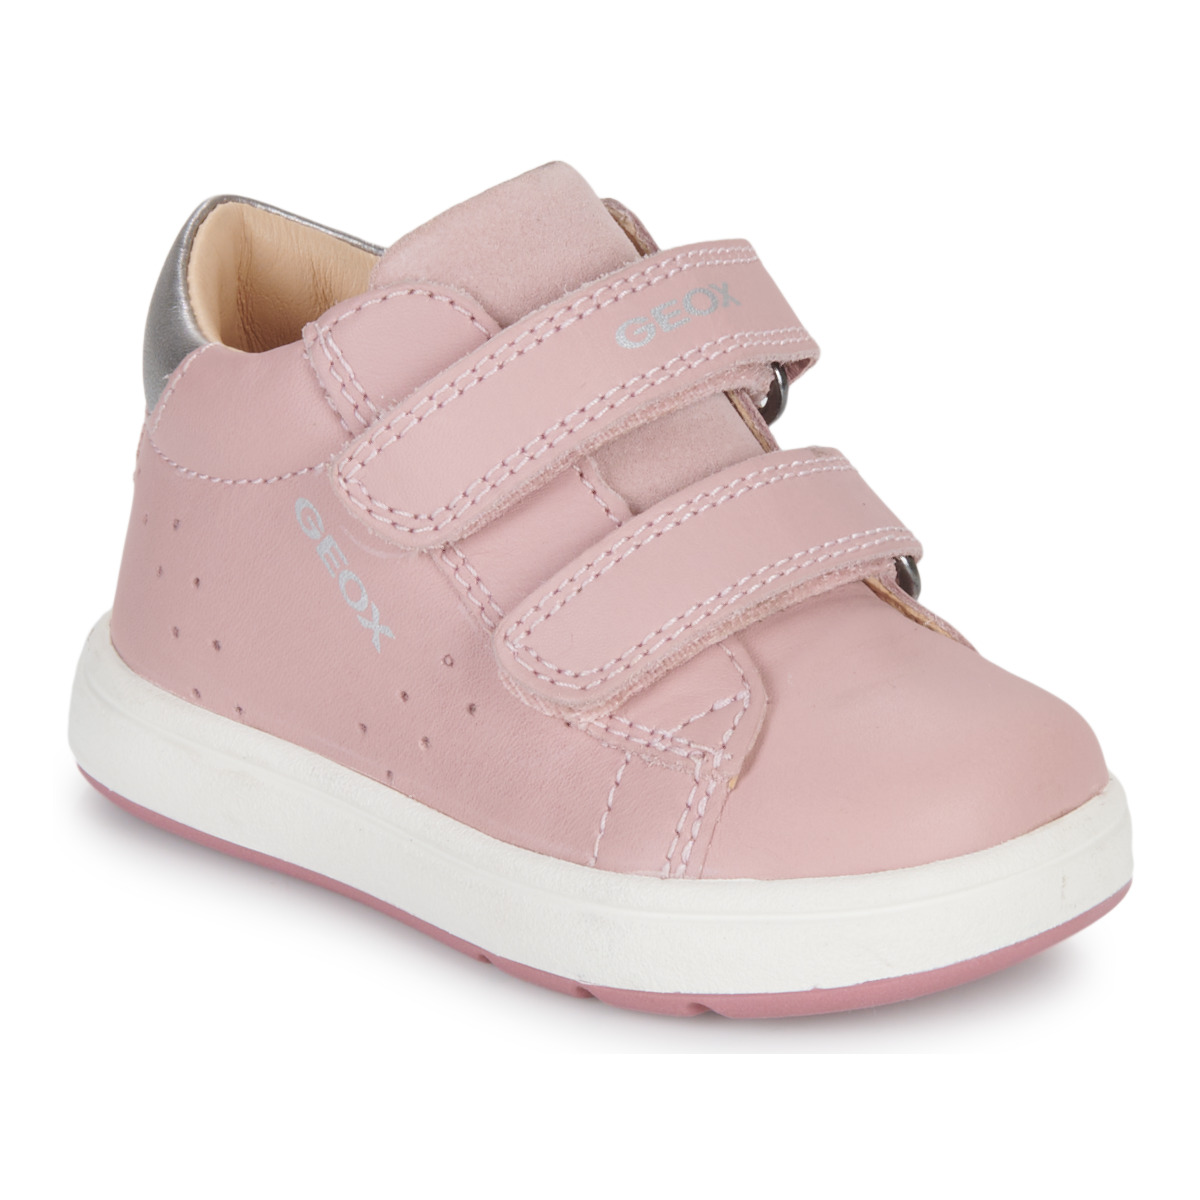 Shoes Girl Low top trainers Geox B BIGLIA GIRL Pink / Silver